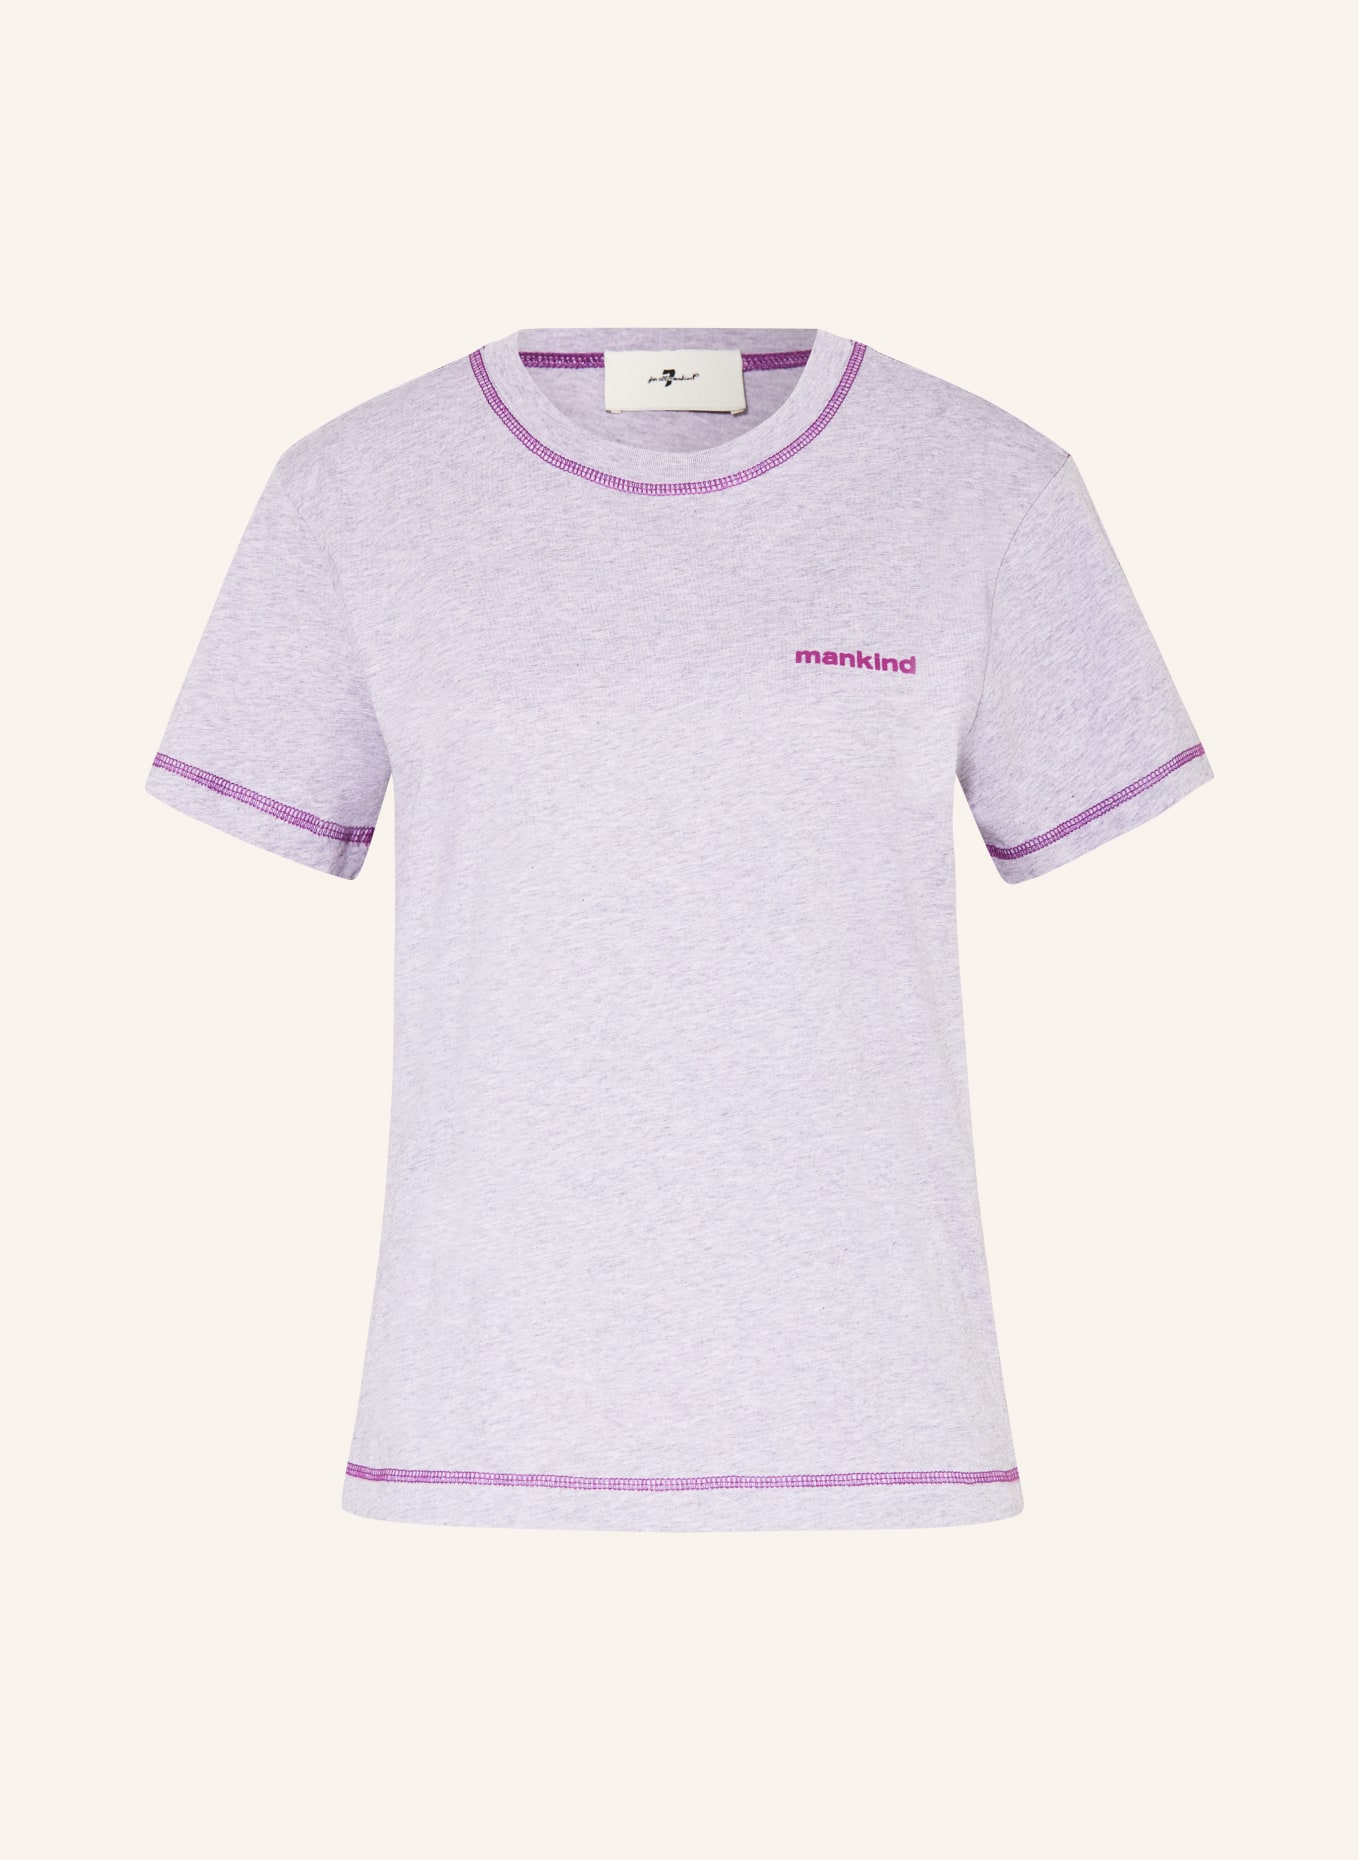 7 for all mankind T-shirt, Color: LIGHT PURPLE (Image 1)